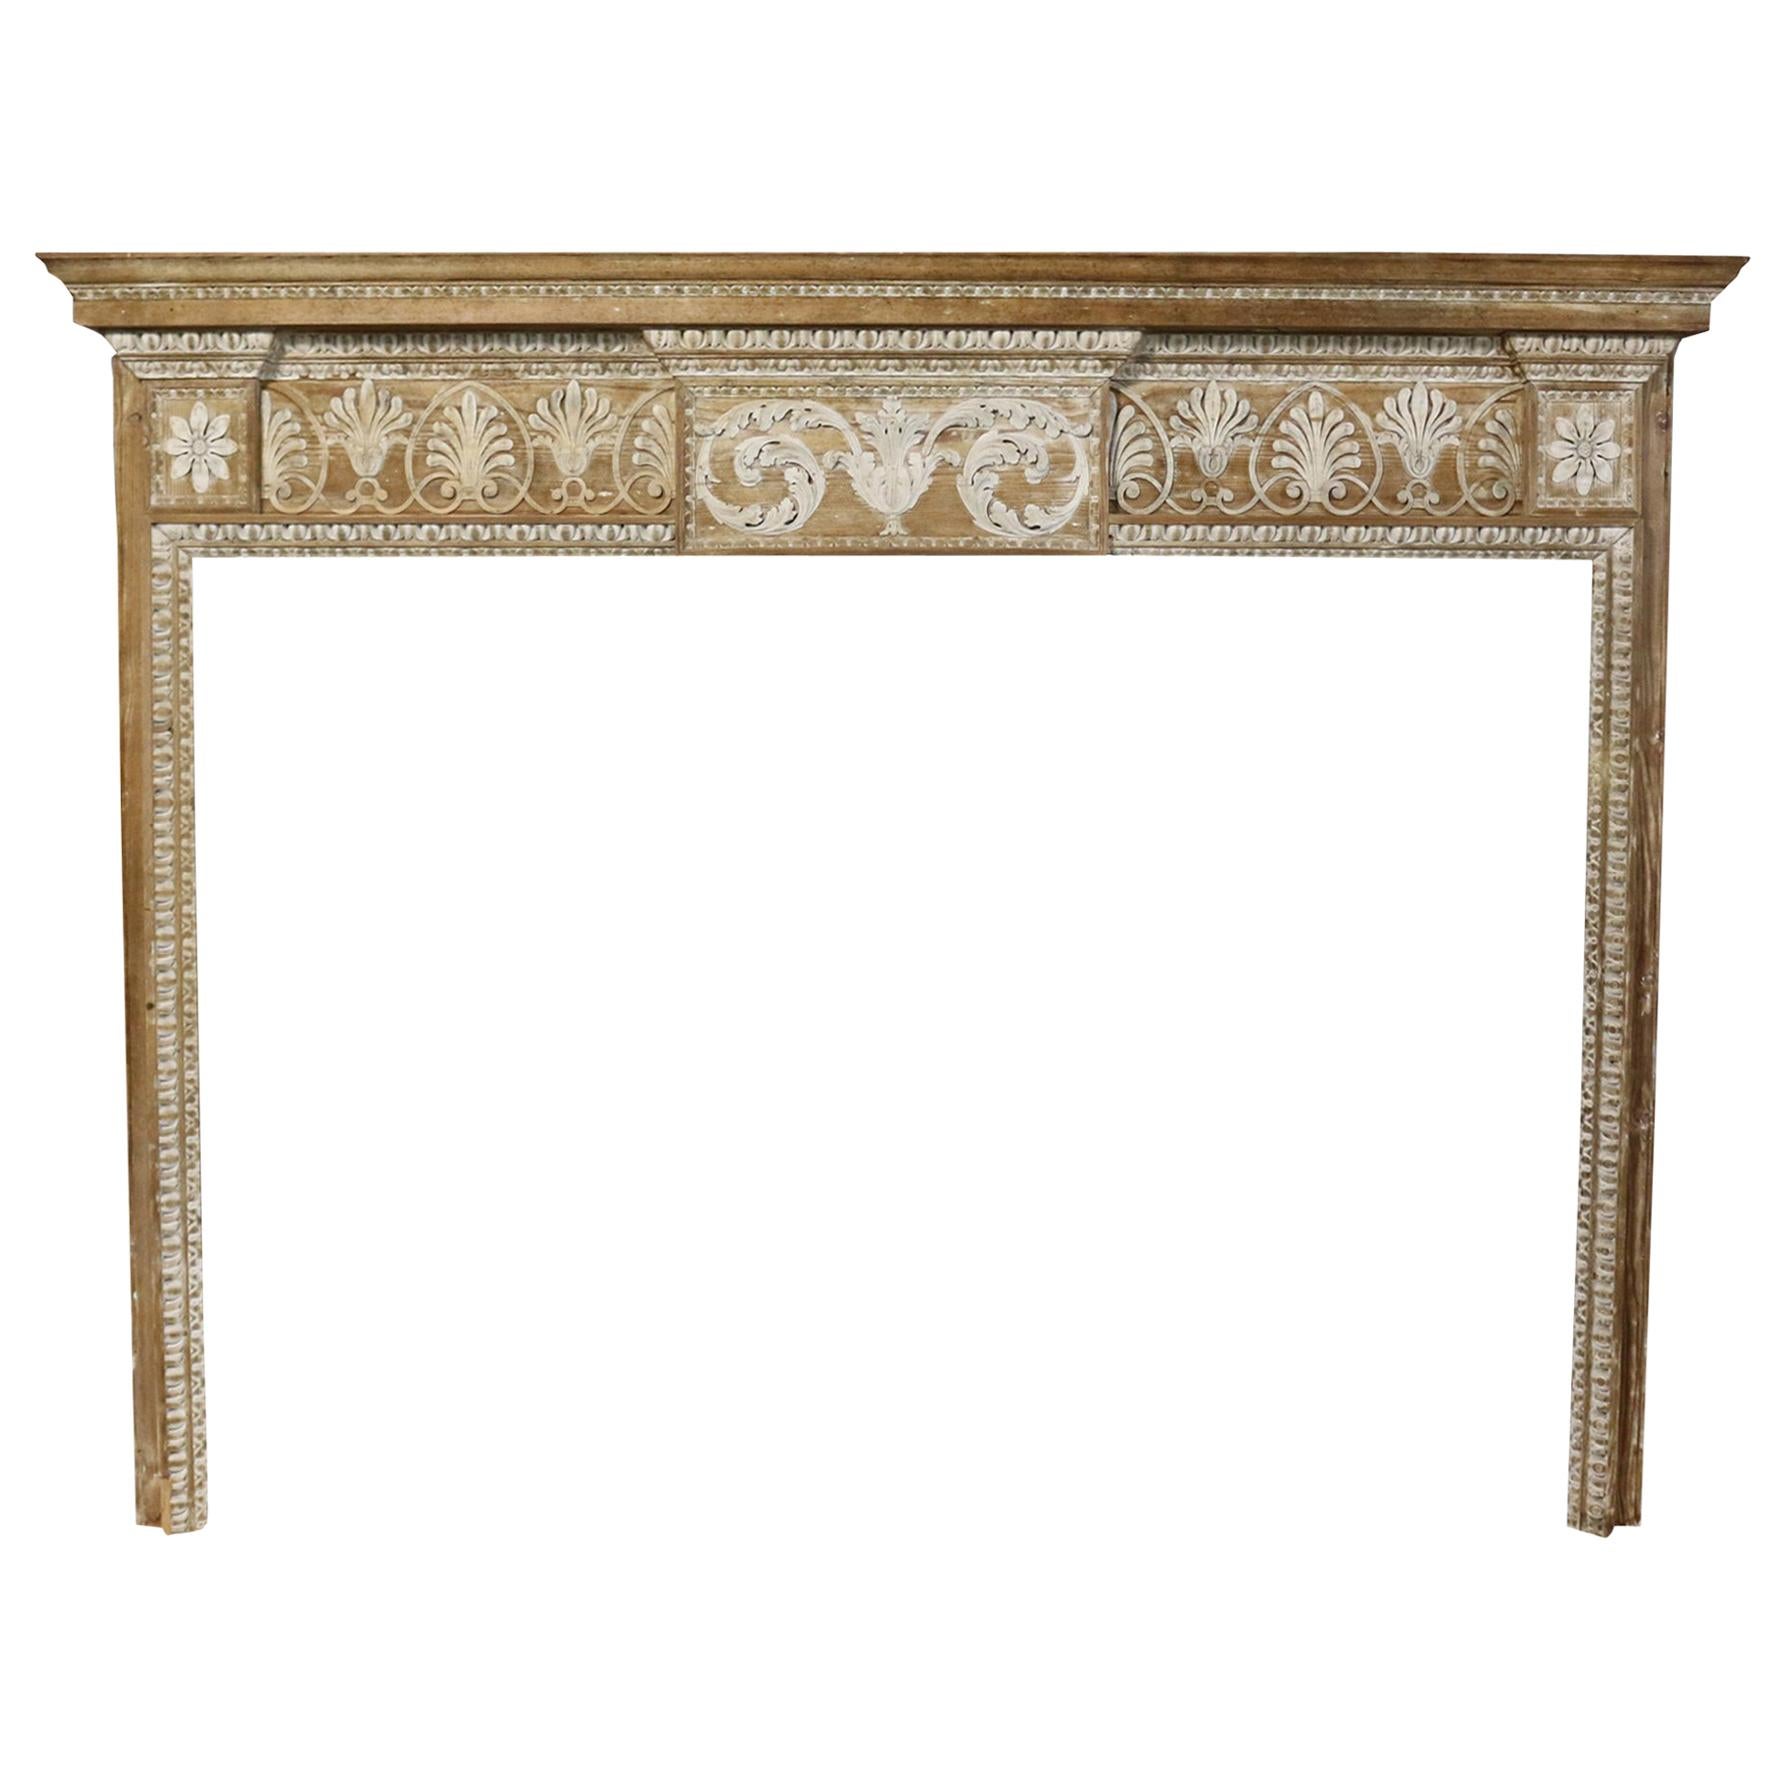 19th Century Carved Pine and Lime Wood Fire Surround